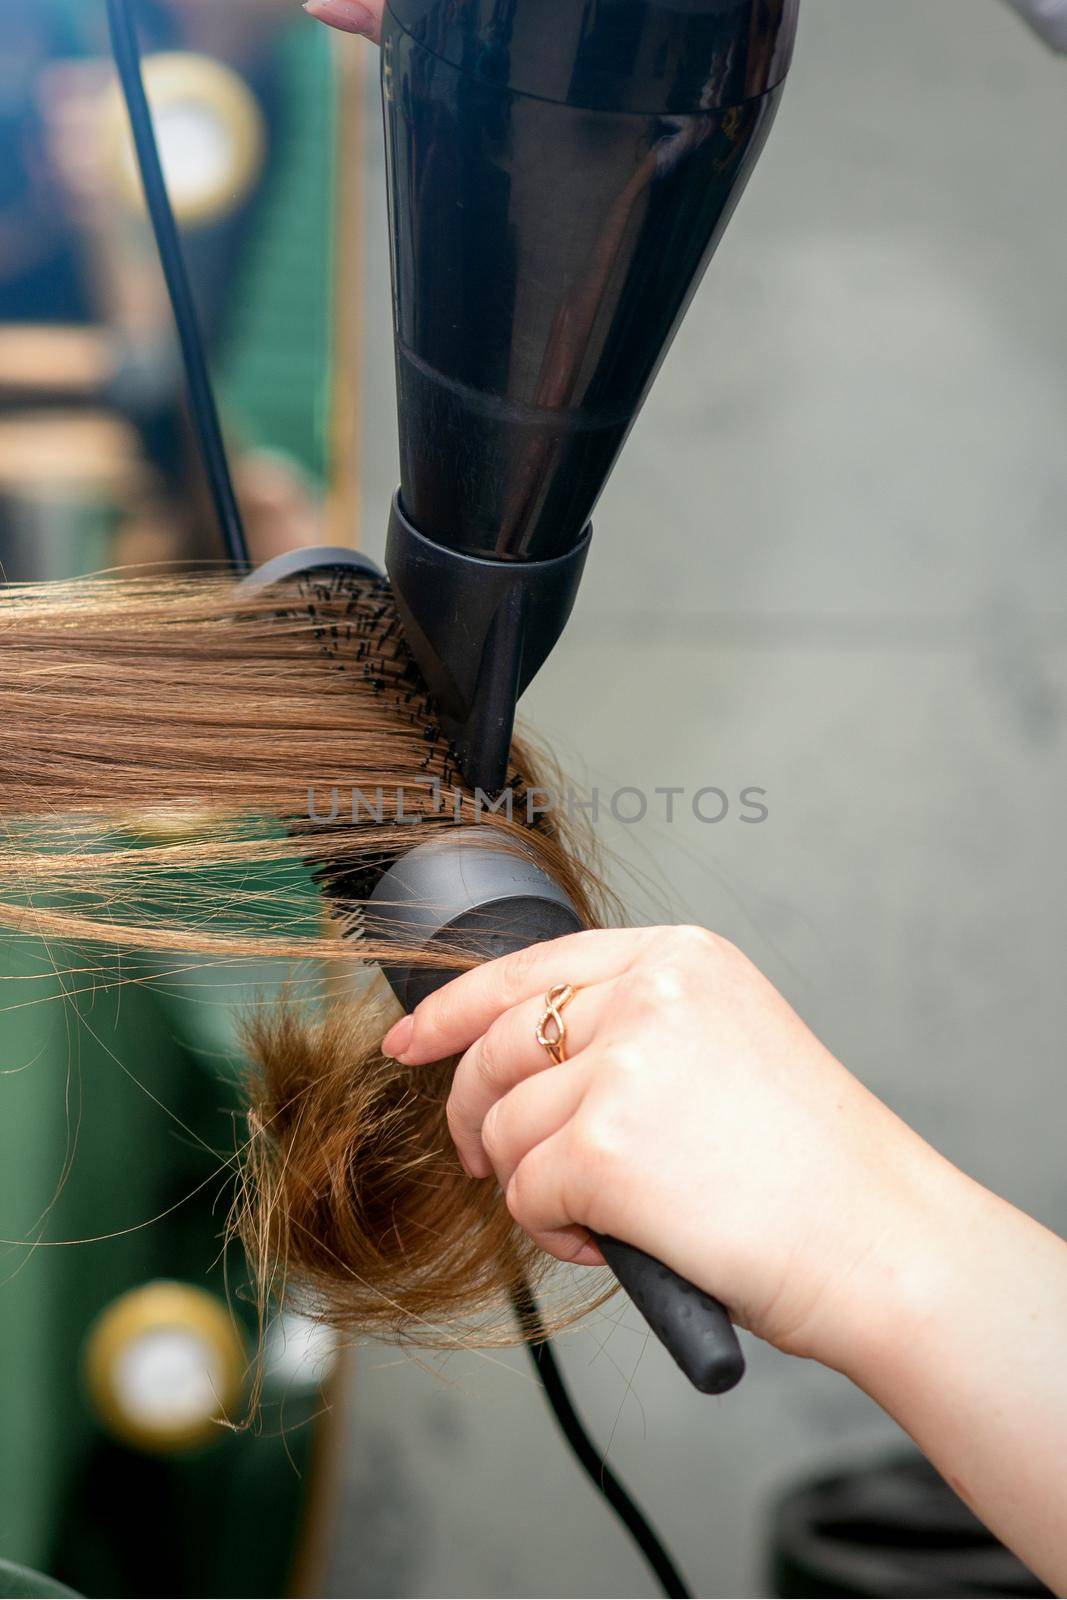 A hairdresser is drying long brown hair with a hairdryer and round brush in a hairdressing salon. by okskukuruza